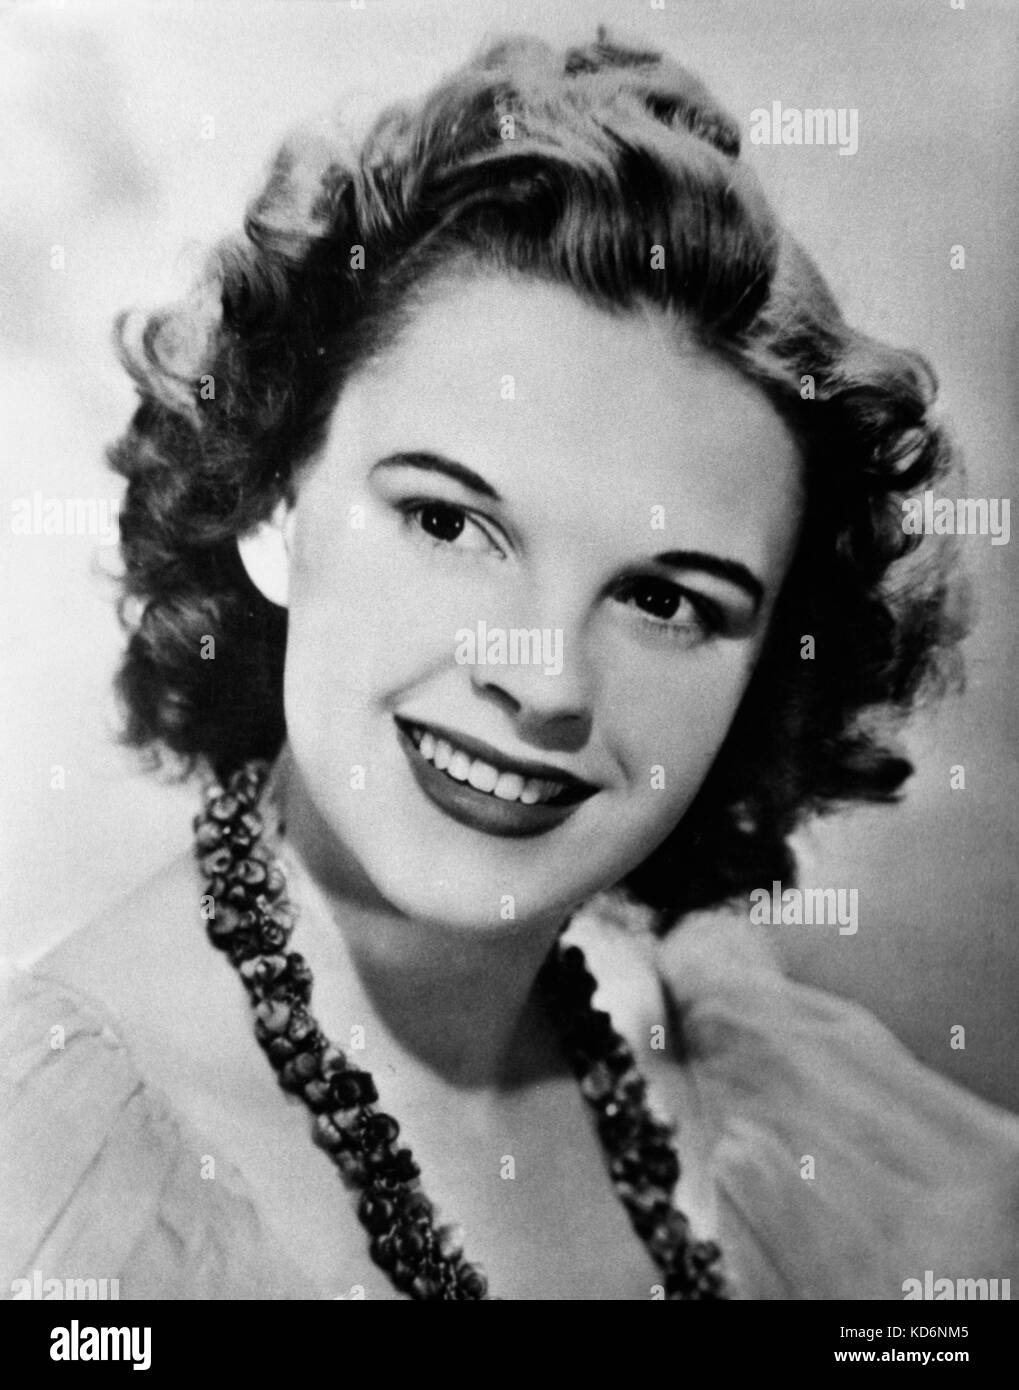 Judy Garland - portrait - American singer and actress  - 10 June 1922 - 22 June 1969 - photo: unknown Stock Photo